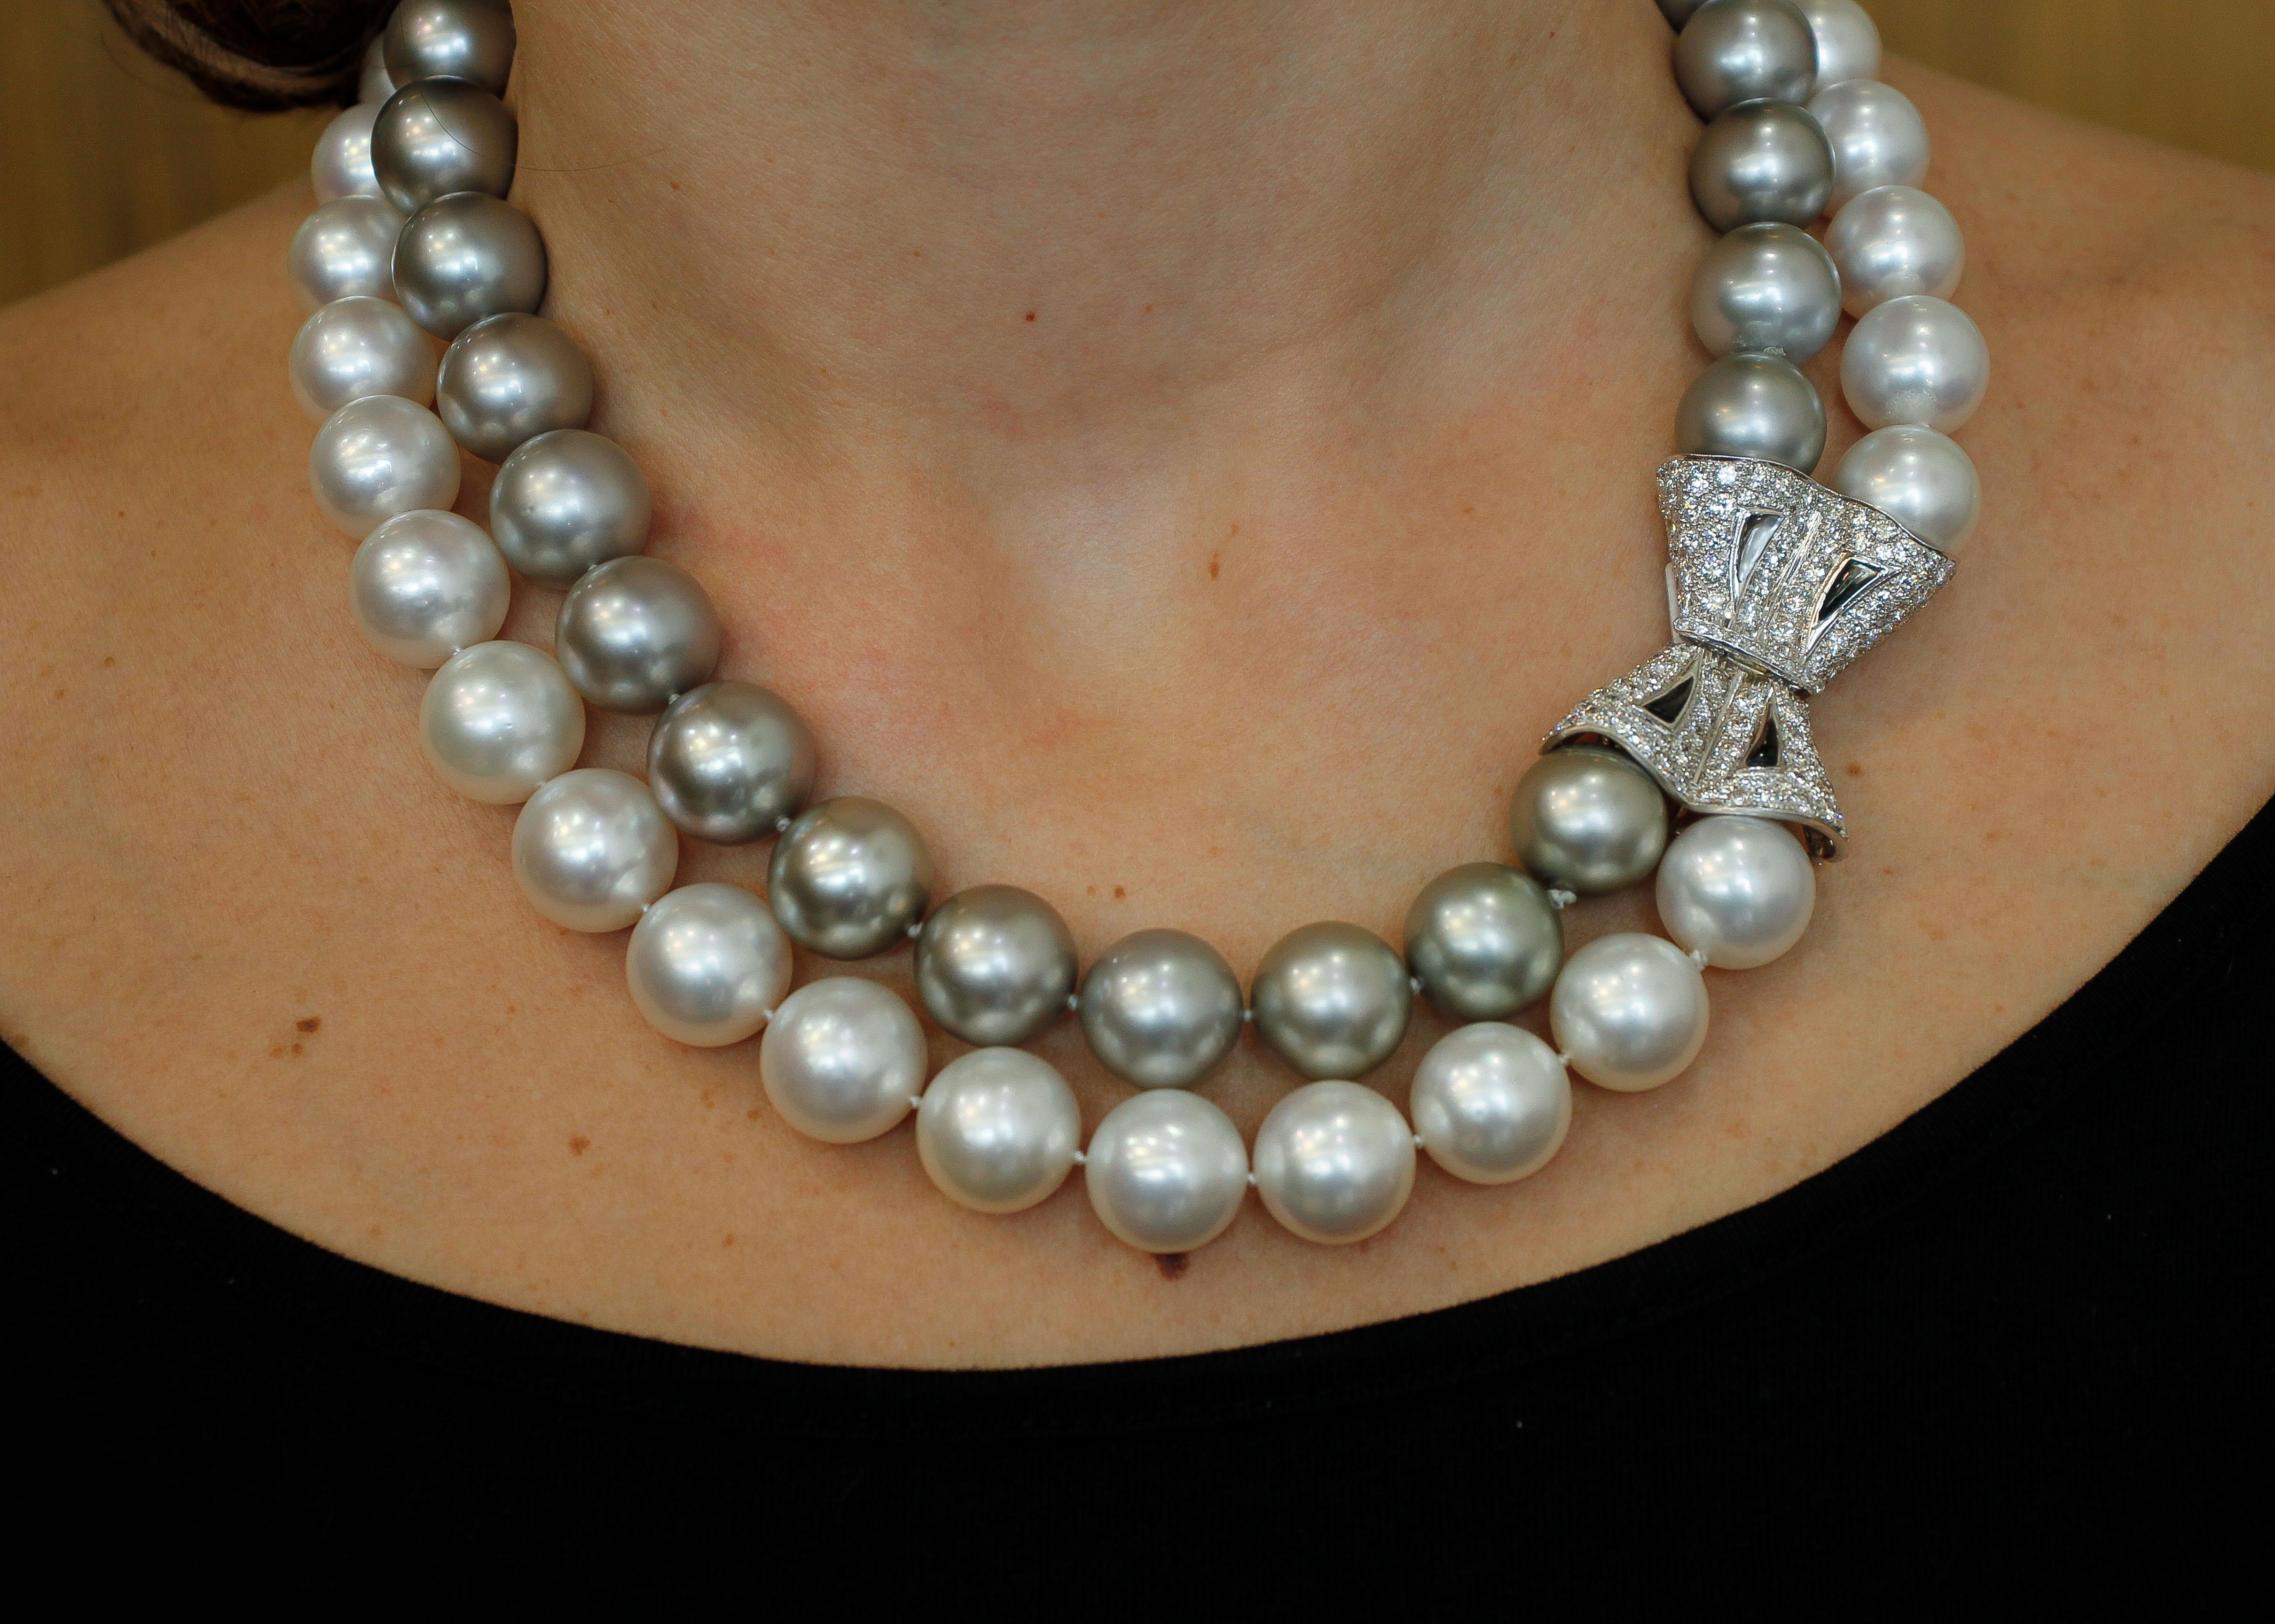 121g White and Grey South Sea Pearls, Diamonds, 14 Karat White Gold Necklace 2